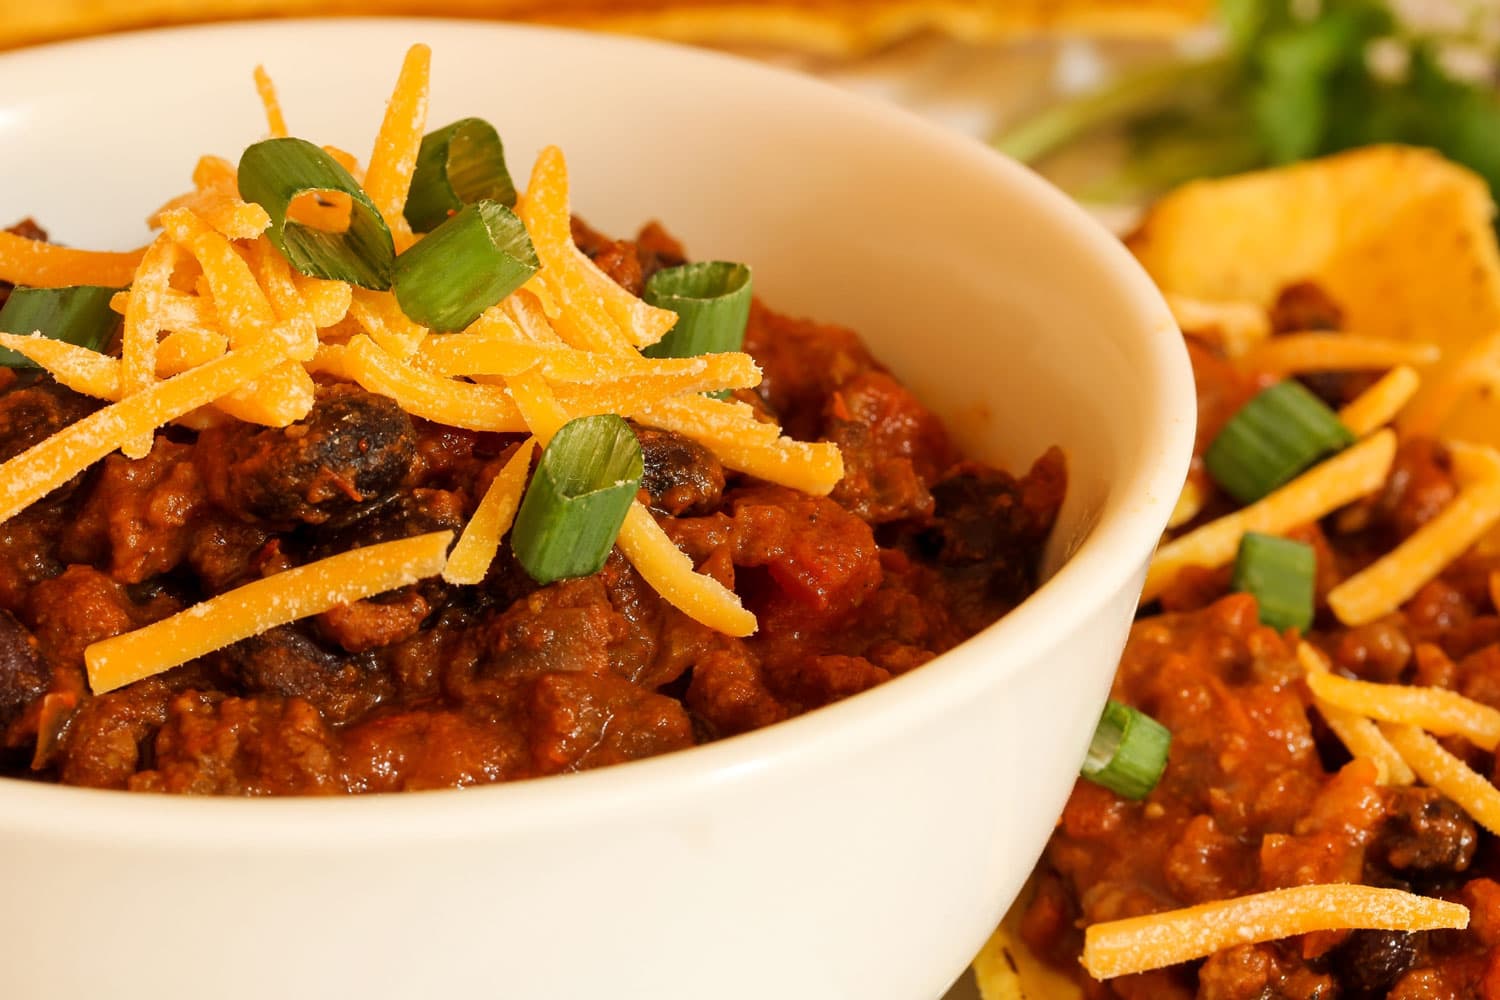 Chili close up / Bow of beef chili, selective focus 